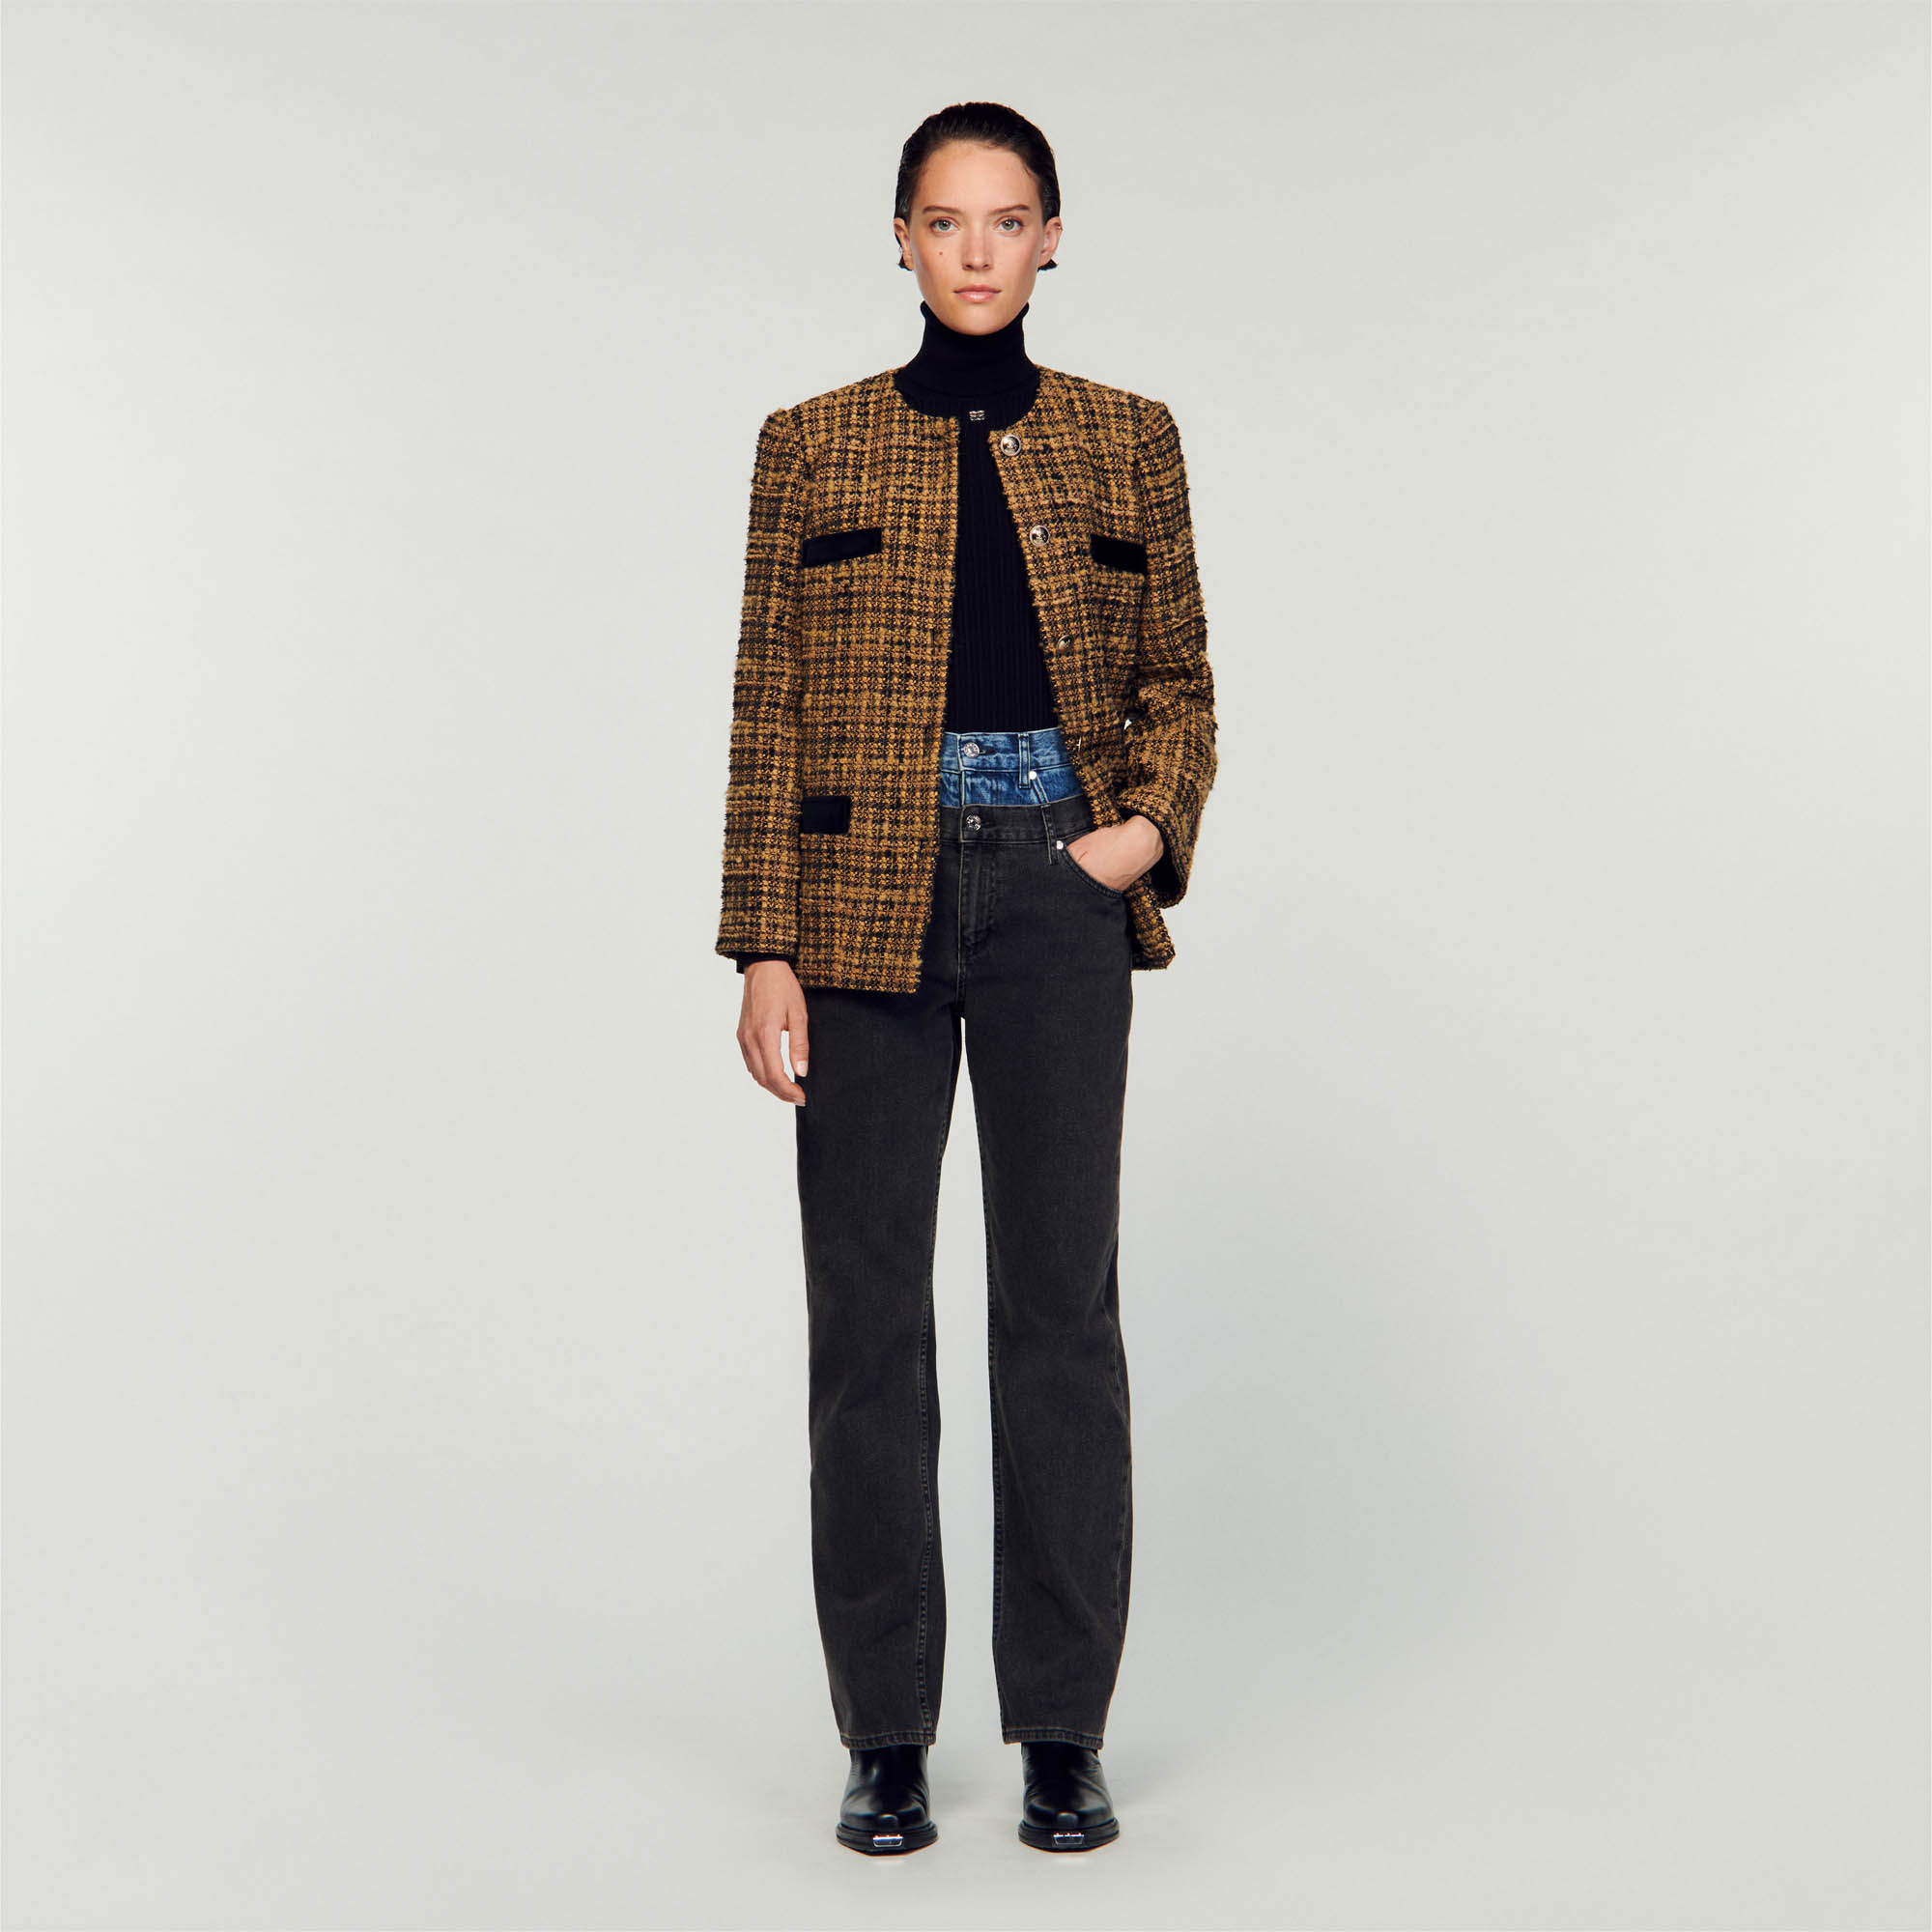 Sandro cotton Short, straight, structured tweed jacket with long sleeves, decorative buttons and embellished with contrasting velvet pockets at the waist and chest